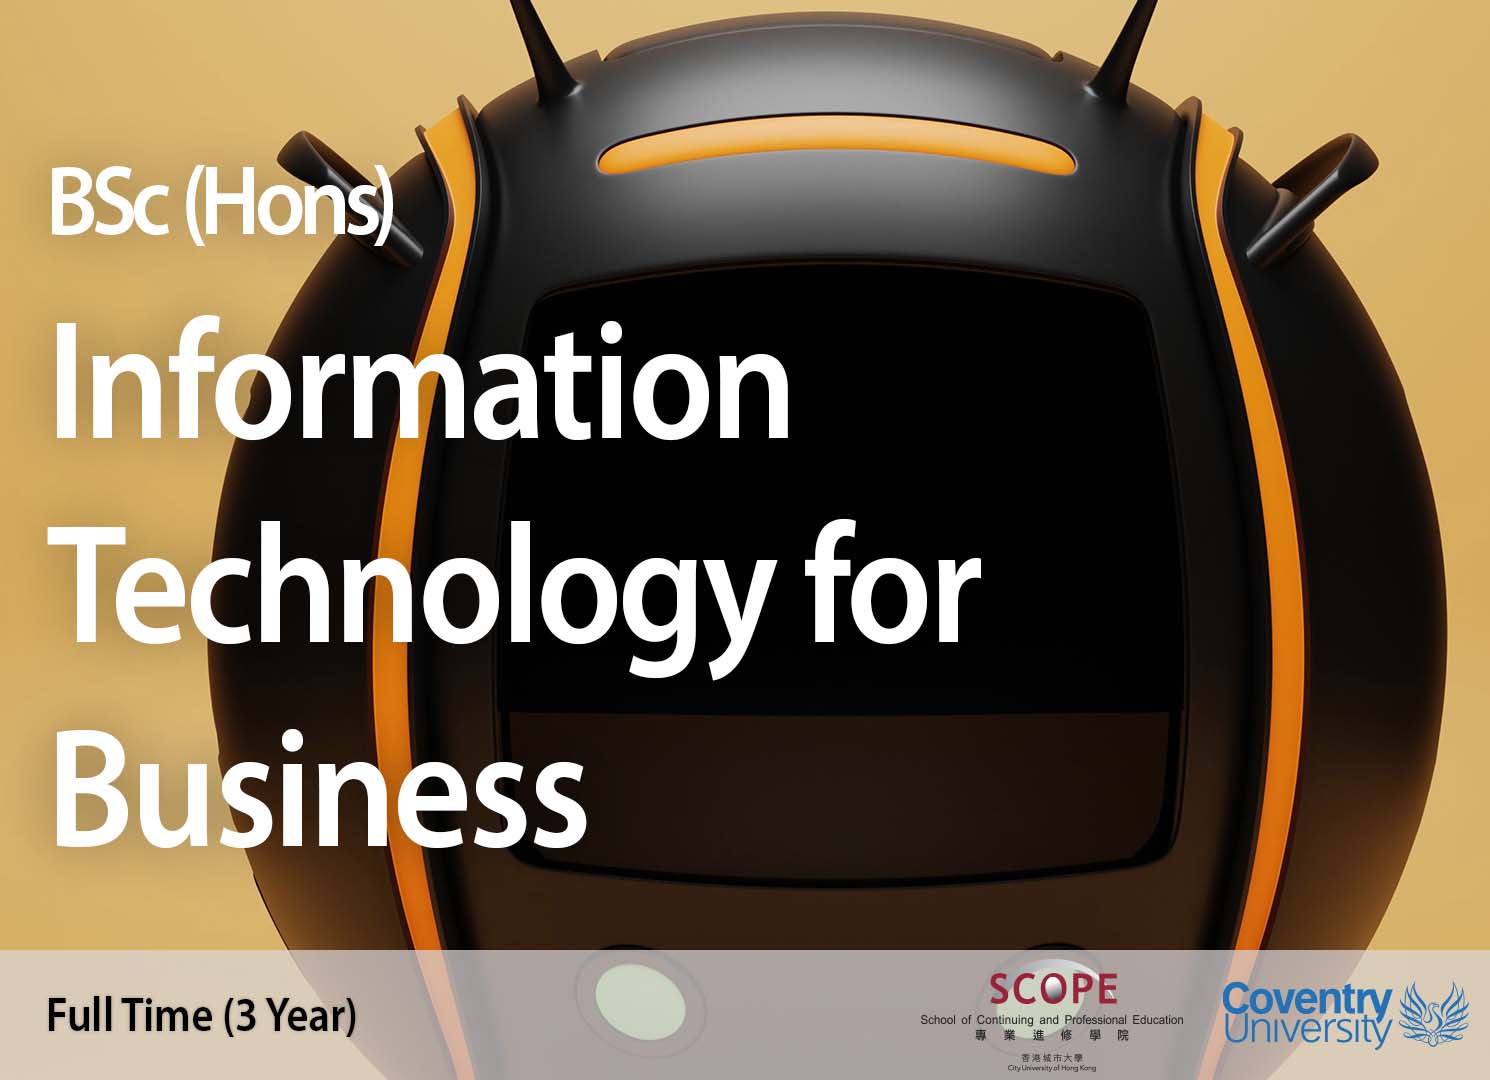 BSc (Hons) Information Technology for Business 商業資訊科技榮譽理學士